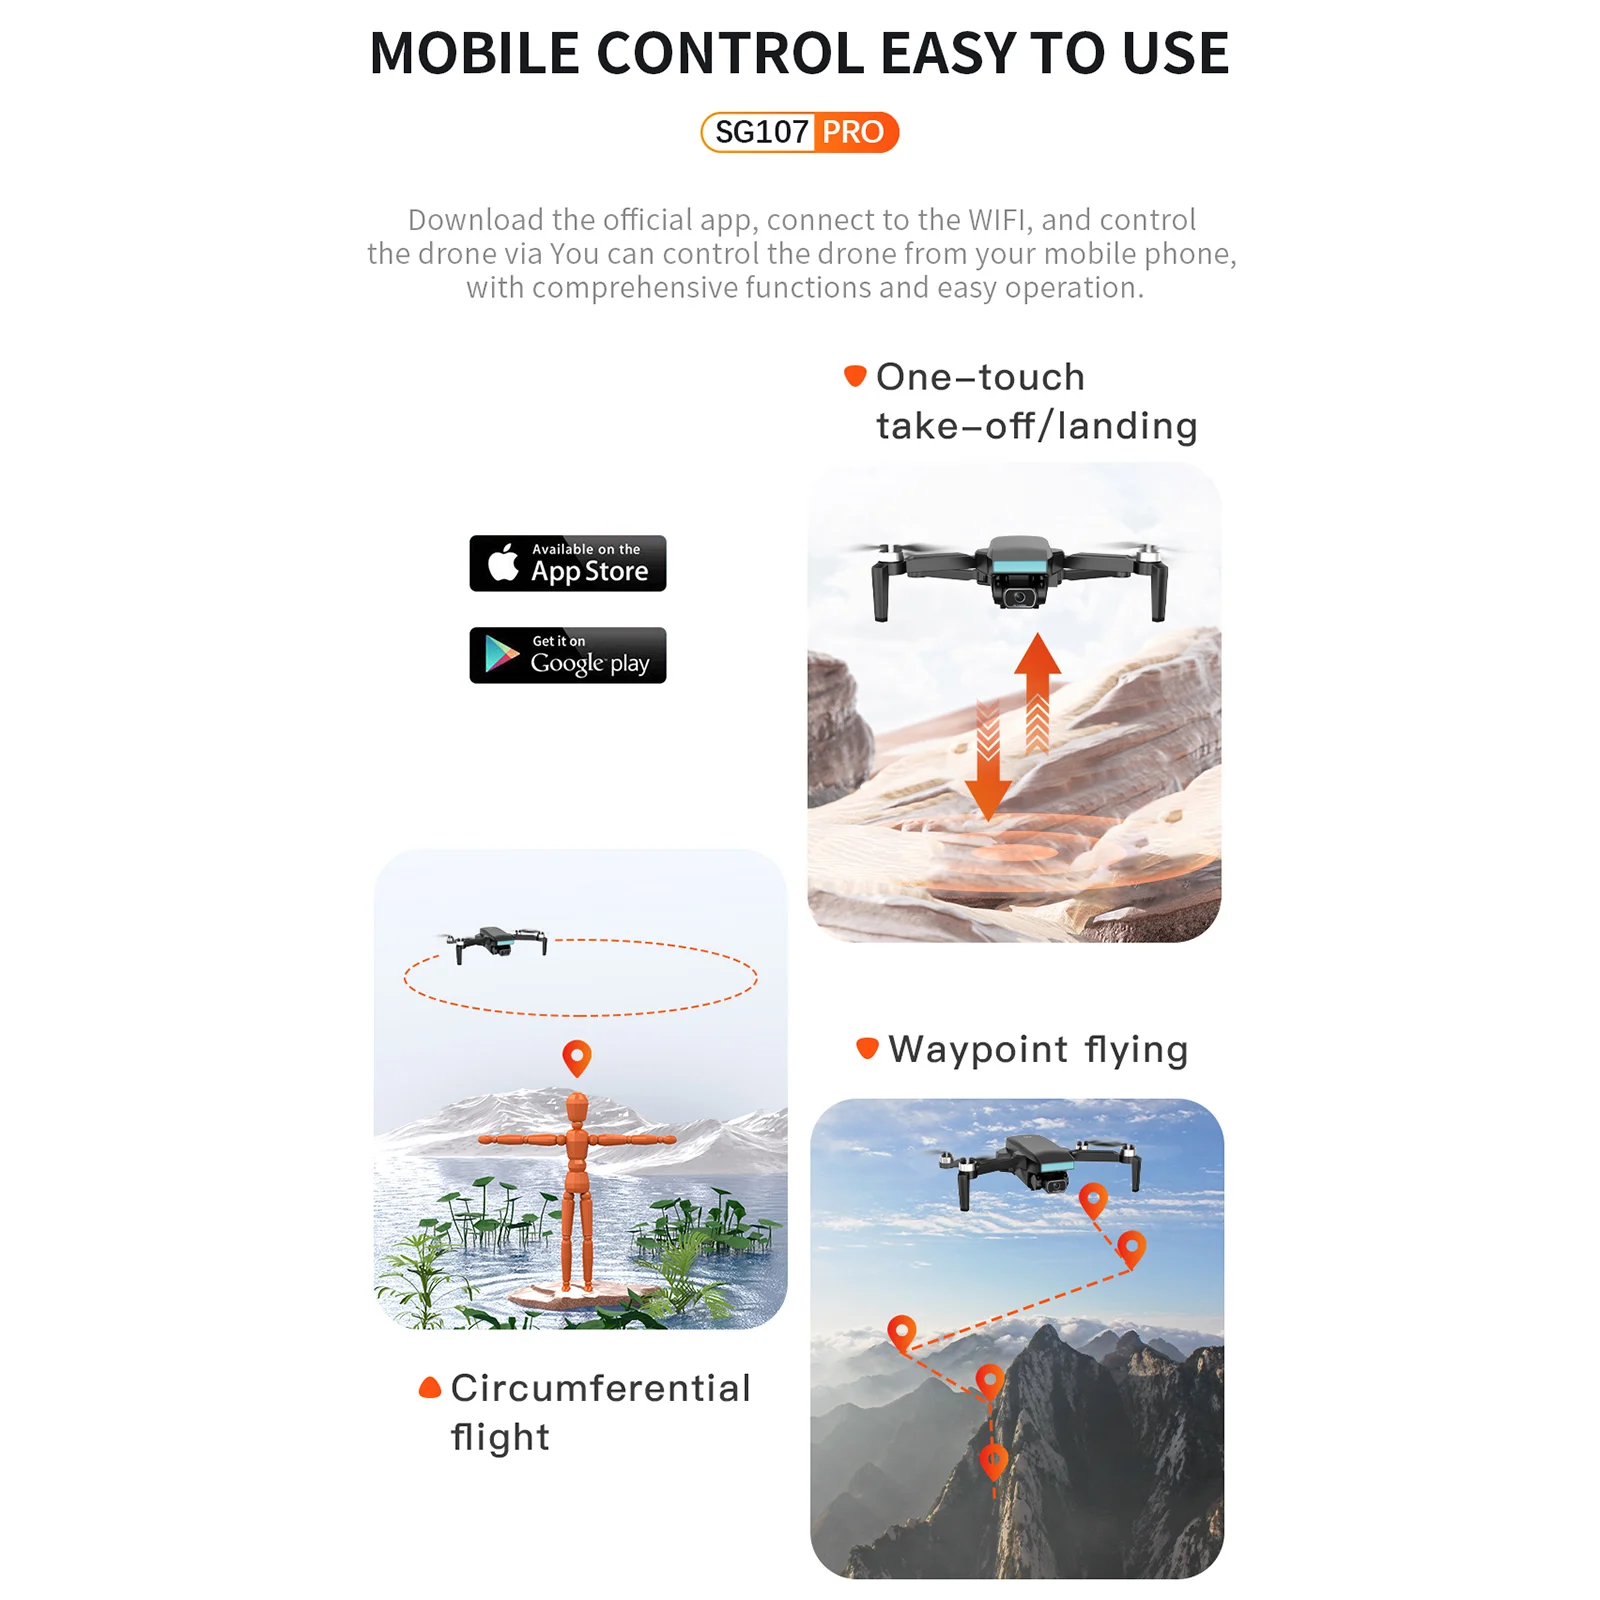 ZLL SG107 Pro Drone, SG107 PRO is an easy-to-use drone control app